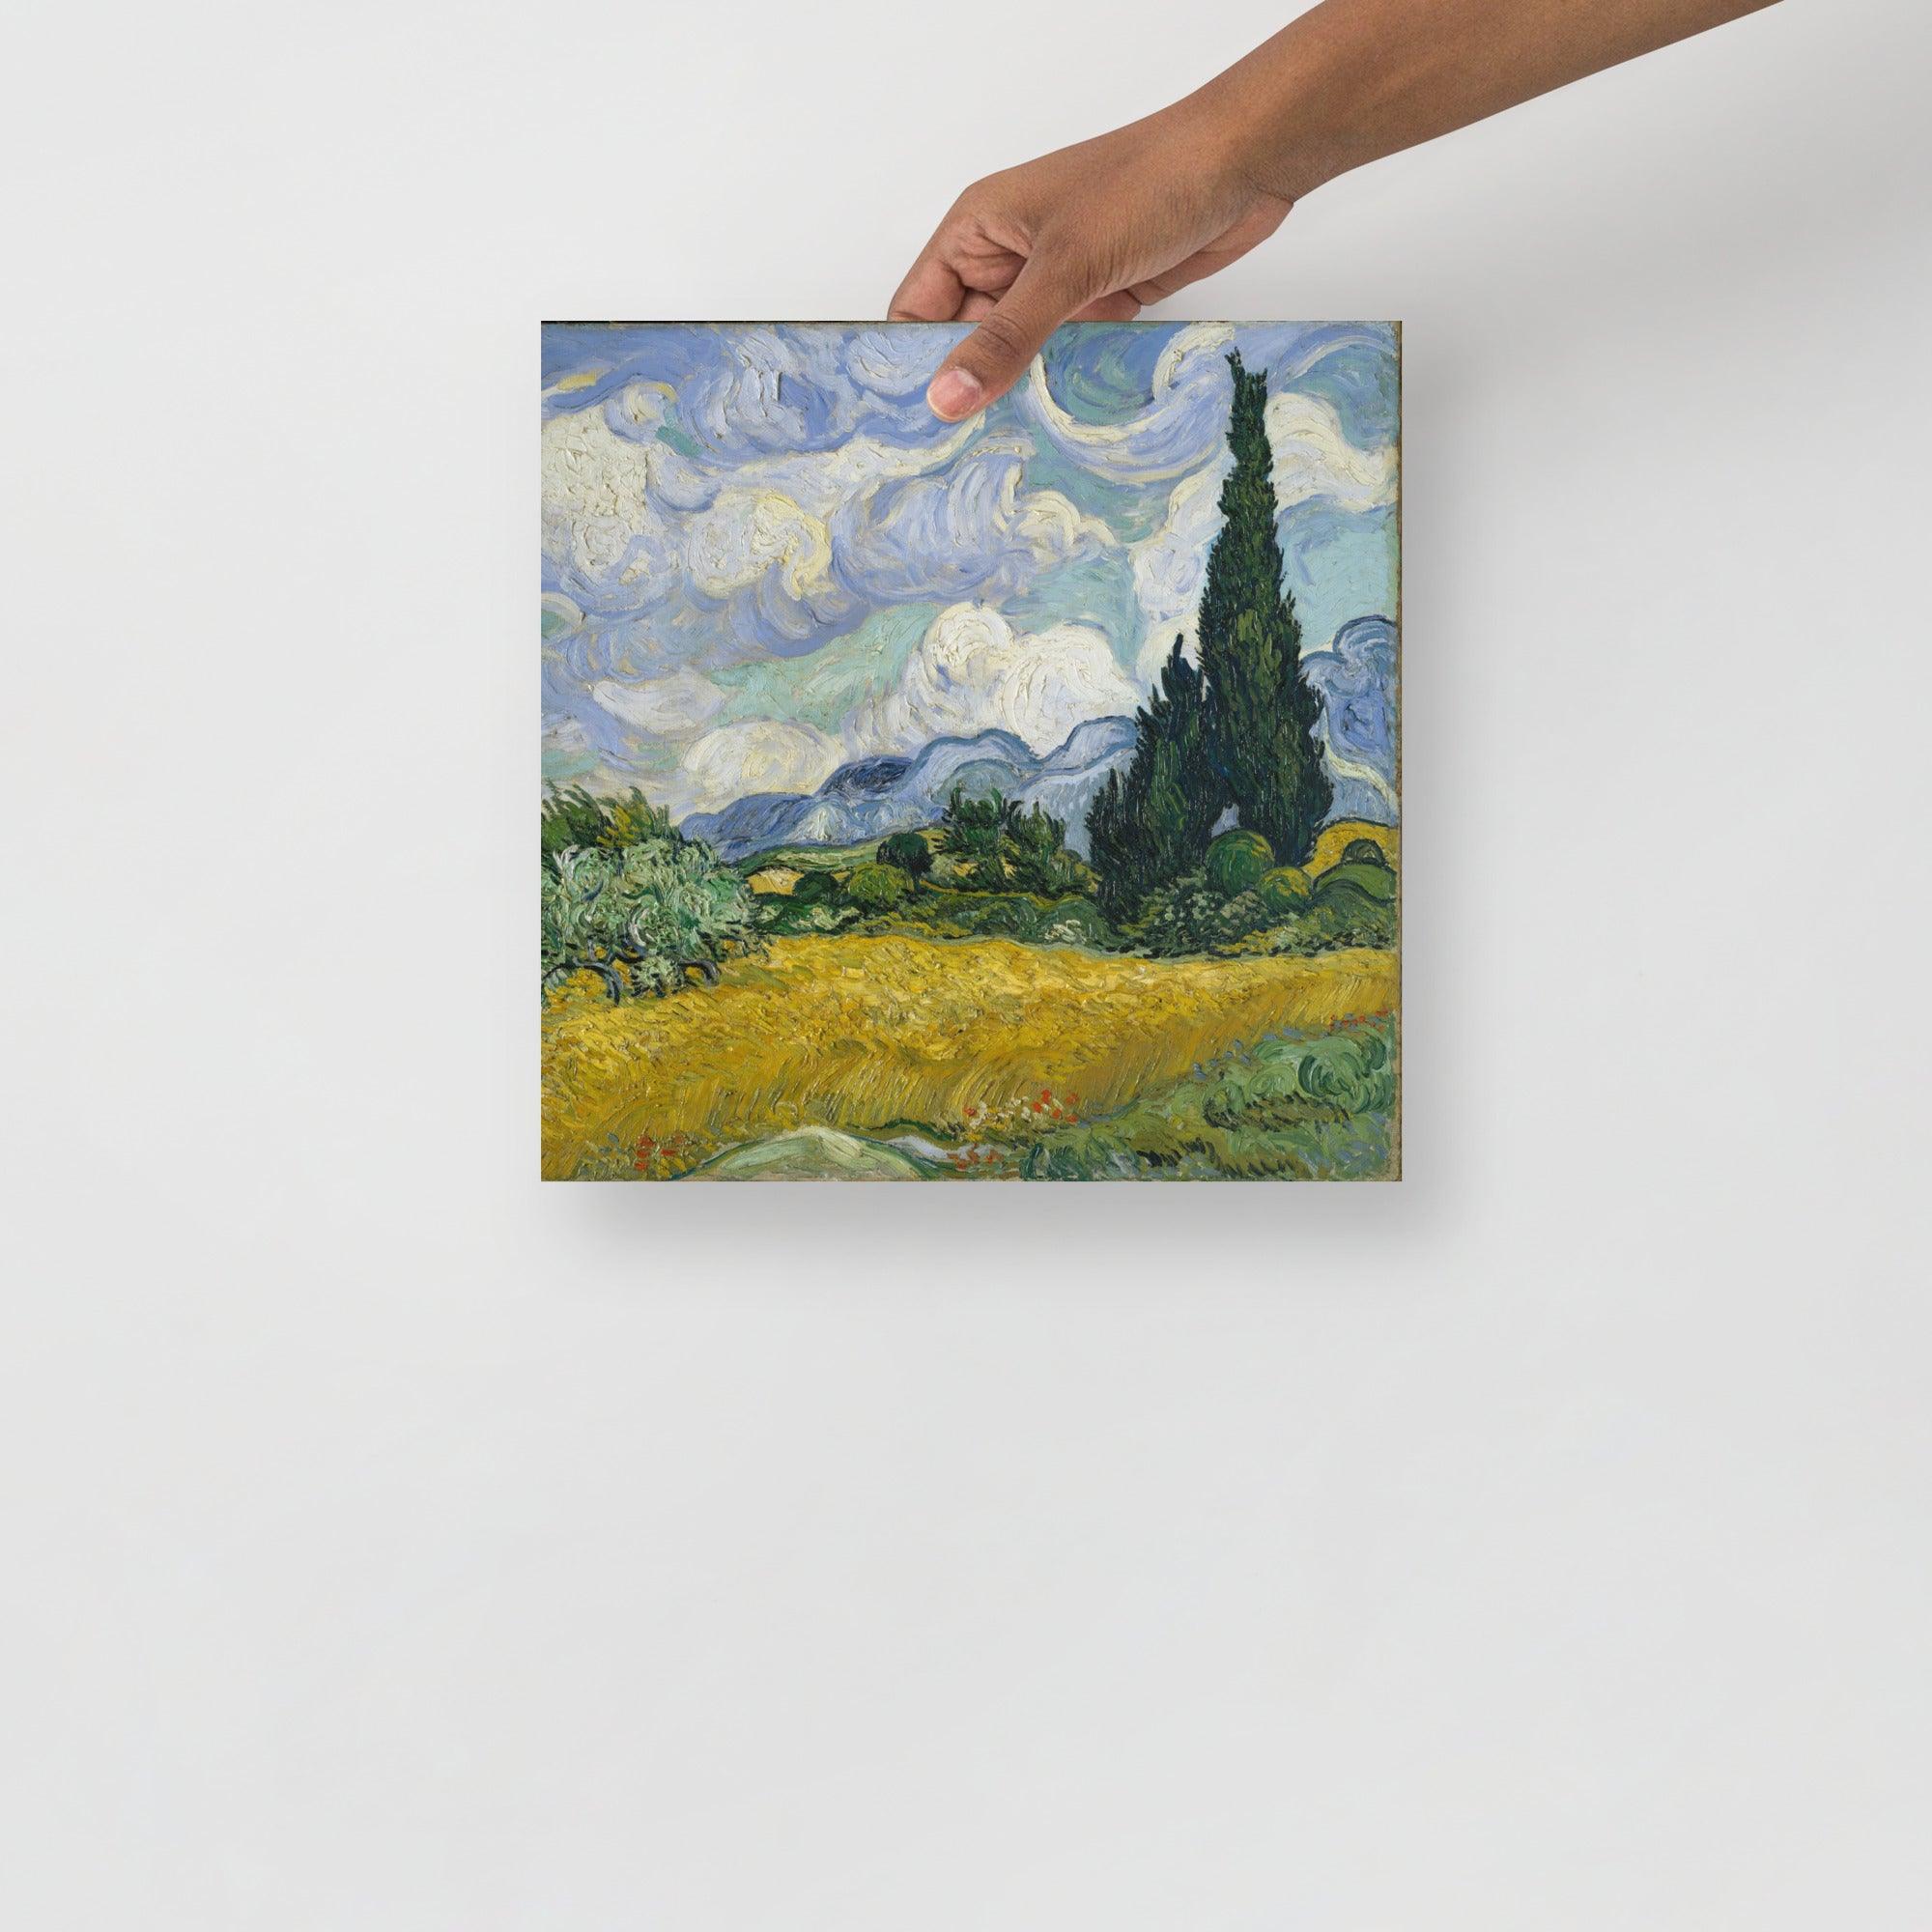 A Wheat Field with Cypresses by Vincent van Gogh poster on a plain backdrop in size 12x12”.